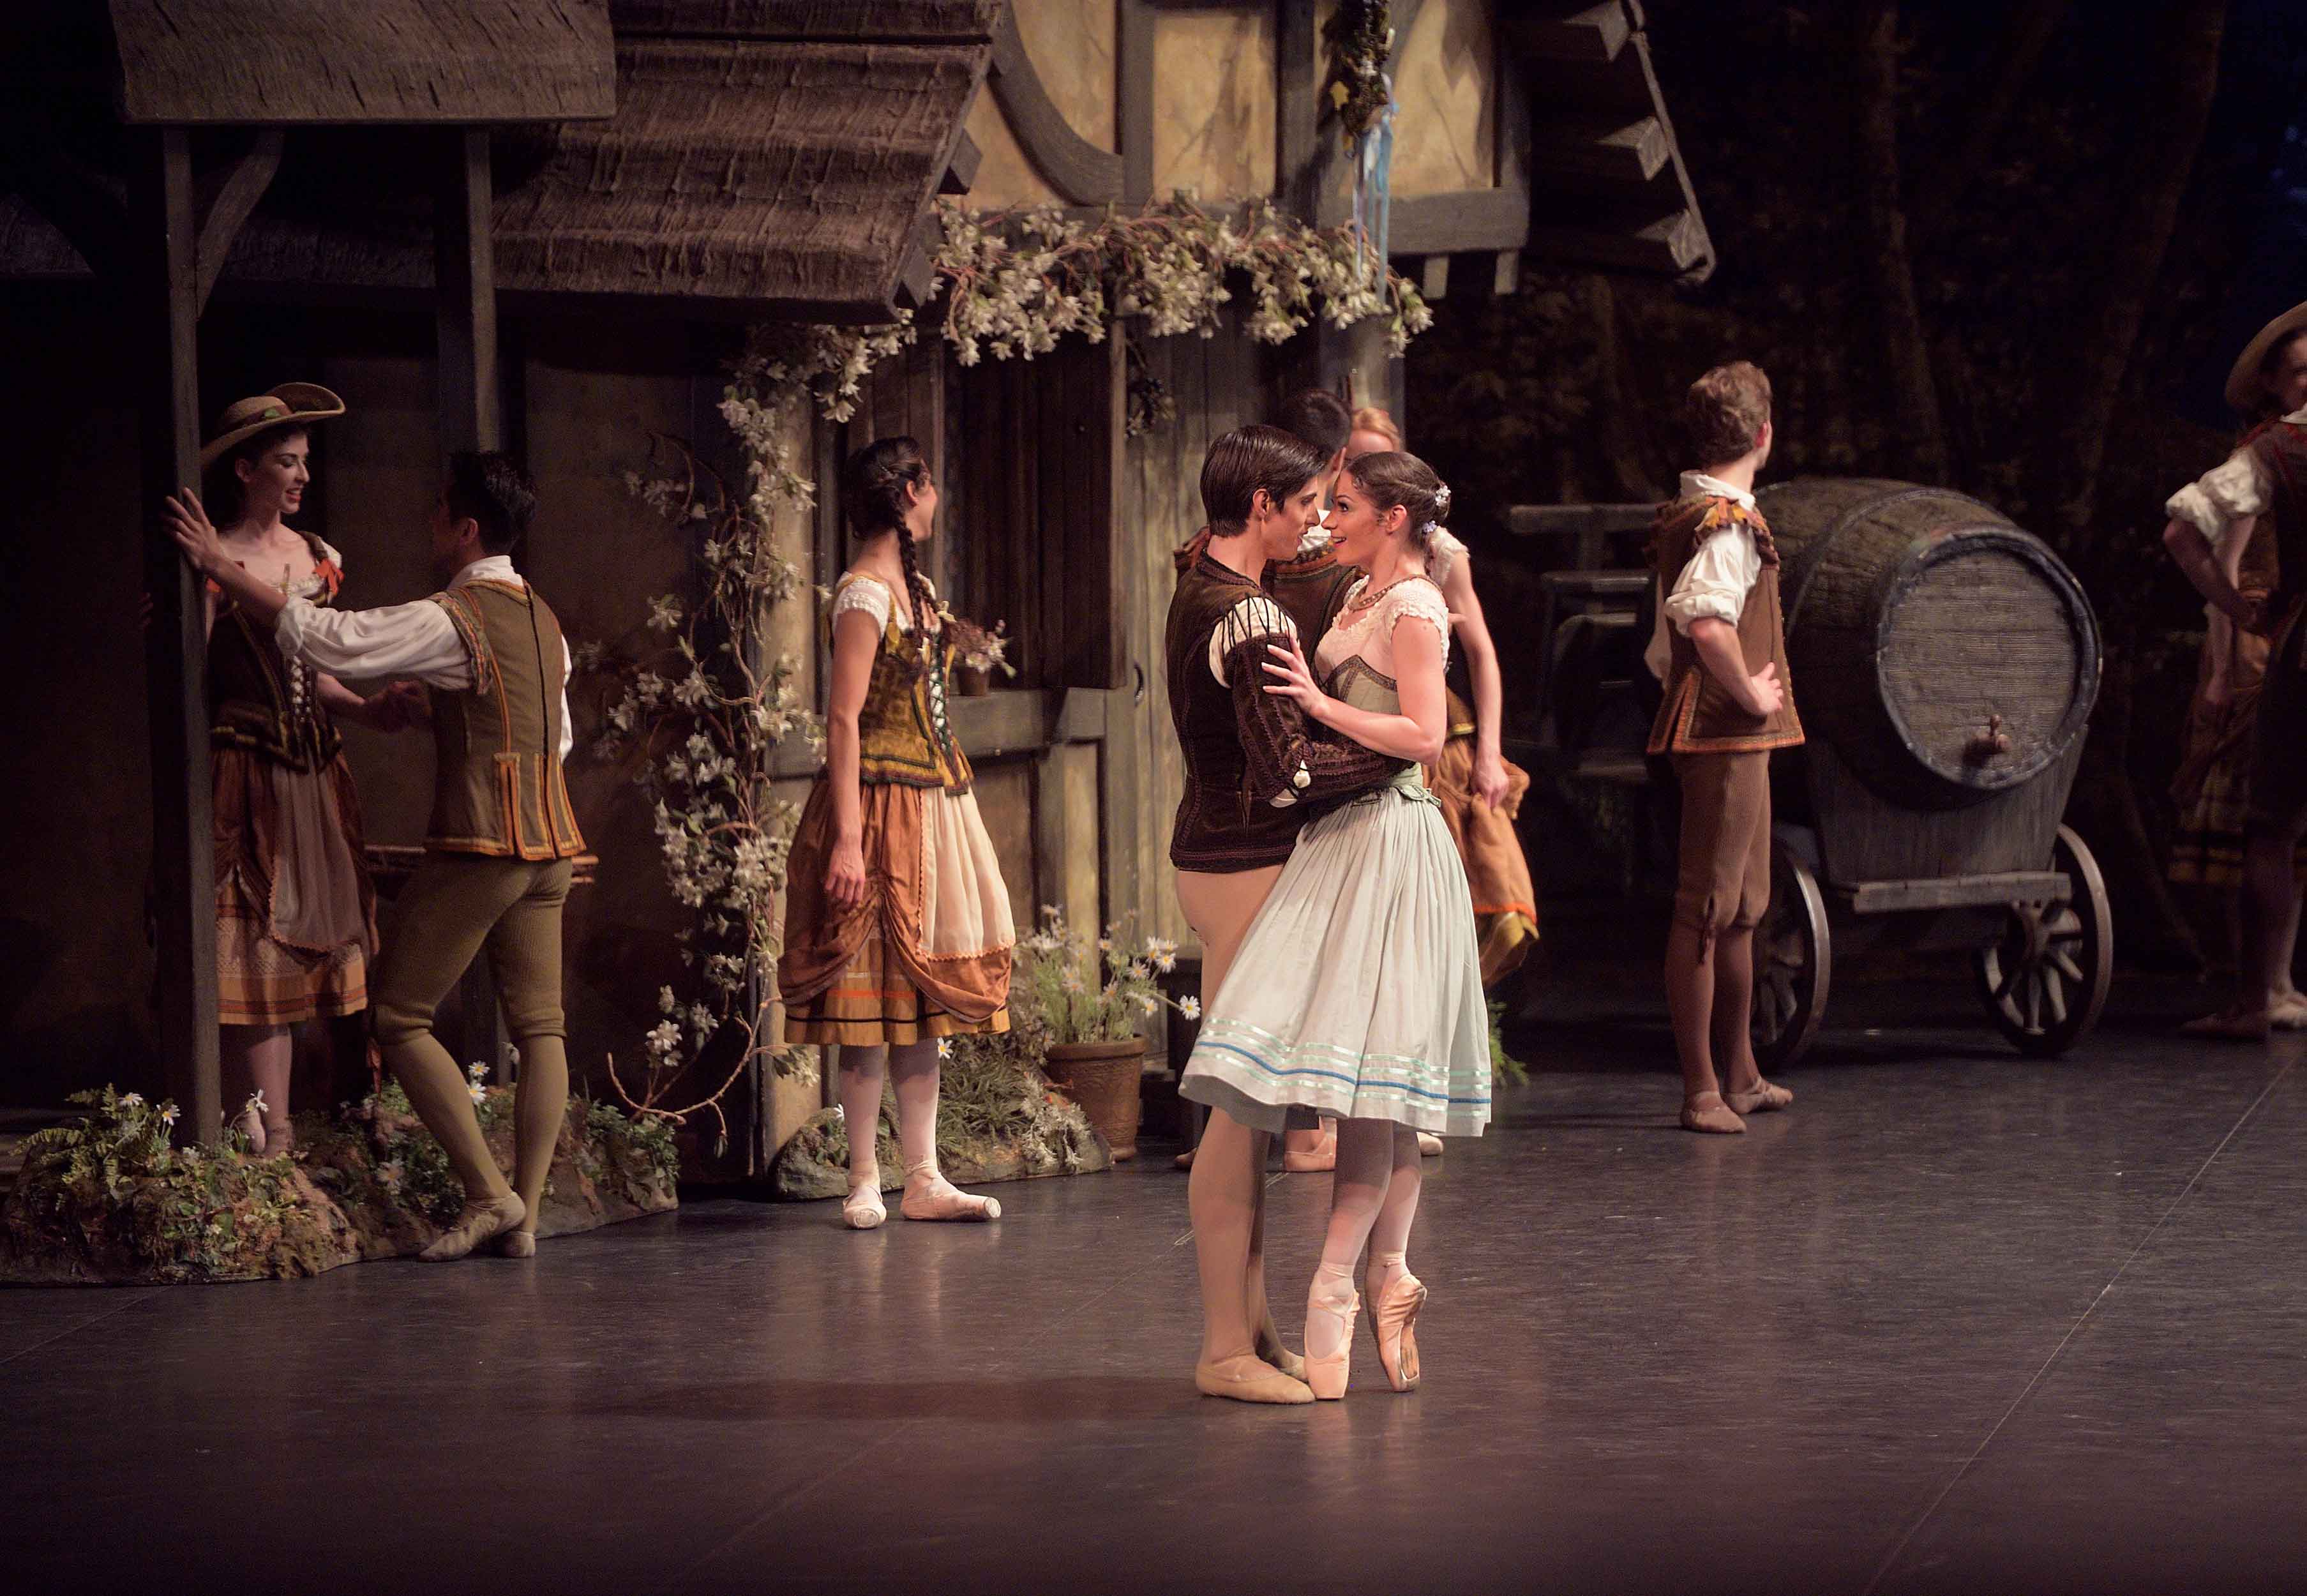 Laurretta-Summerscales-as-Giselle-and-Xander-Parish-as-Albrecht-in-Giselle-(c)-Laurent-Liotardo-(1)